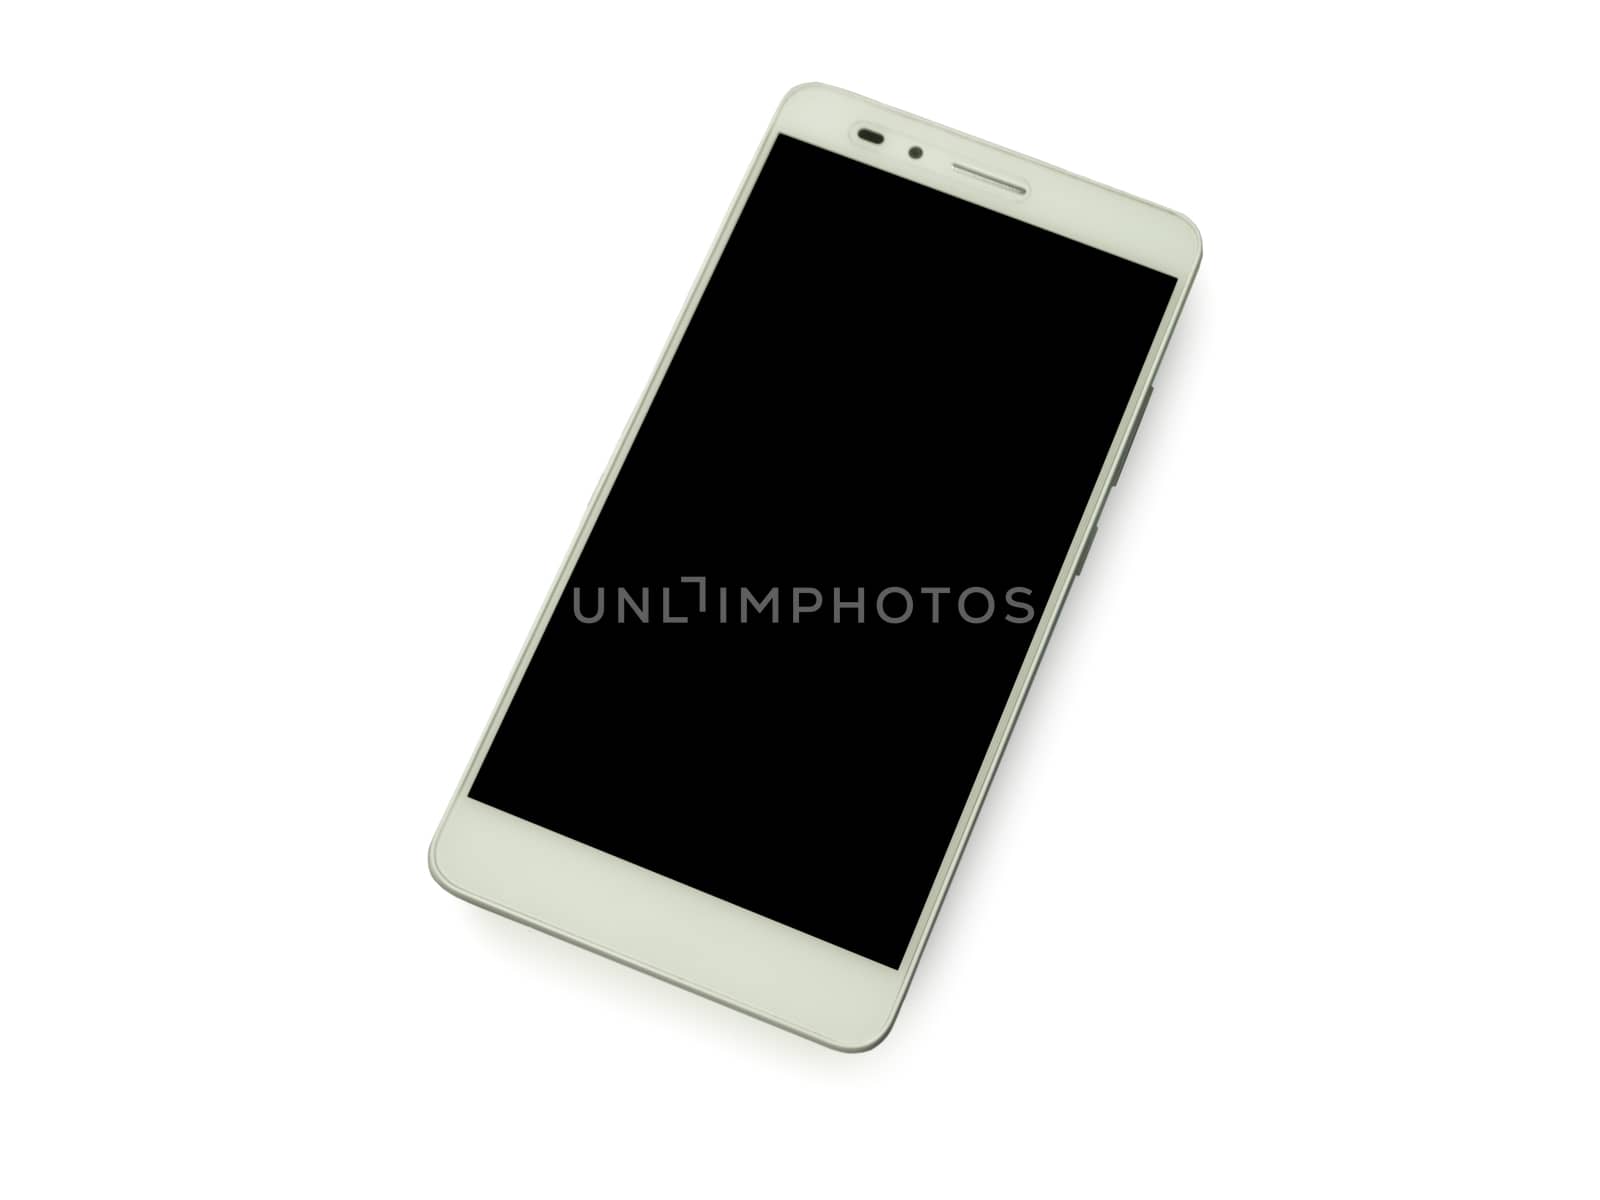 Isolated Smartphone black blank screen with White Background